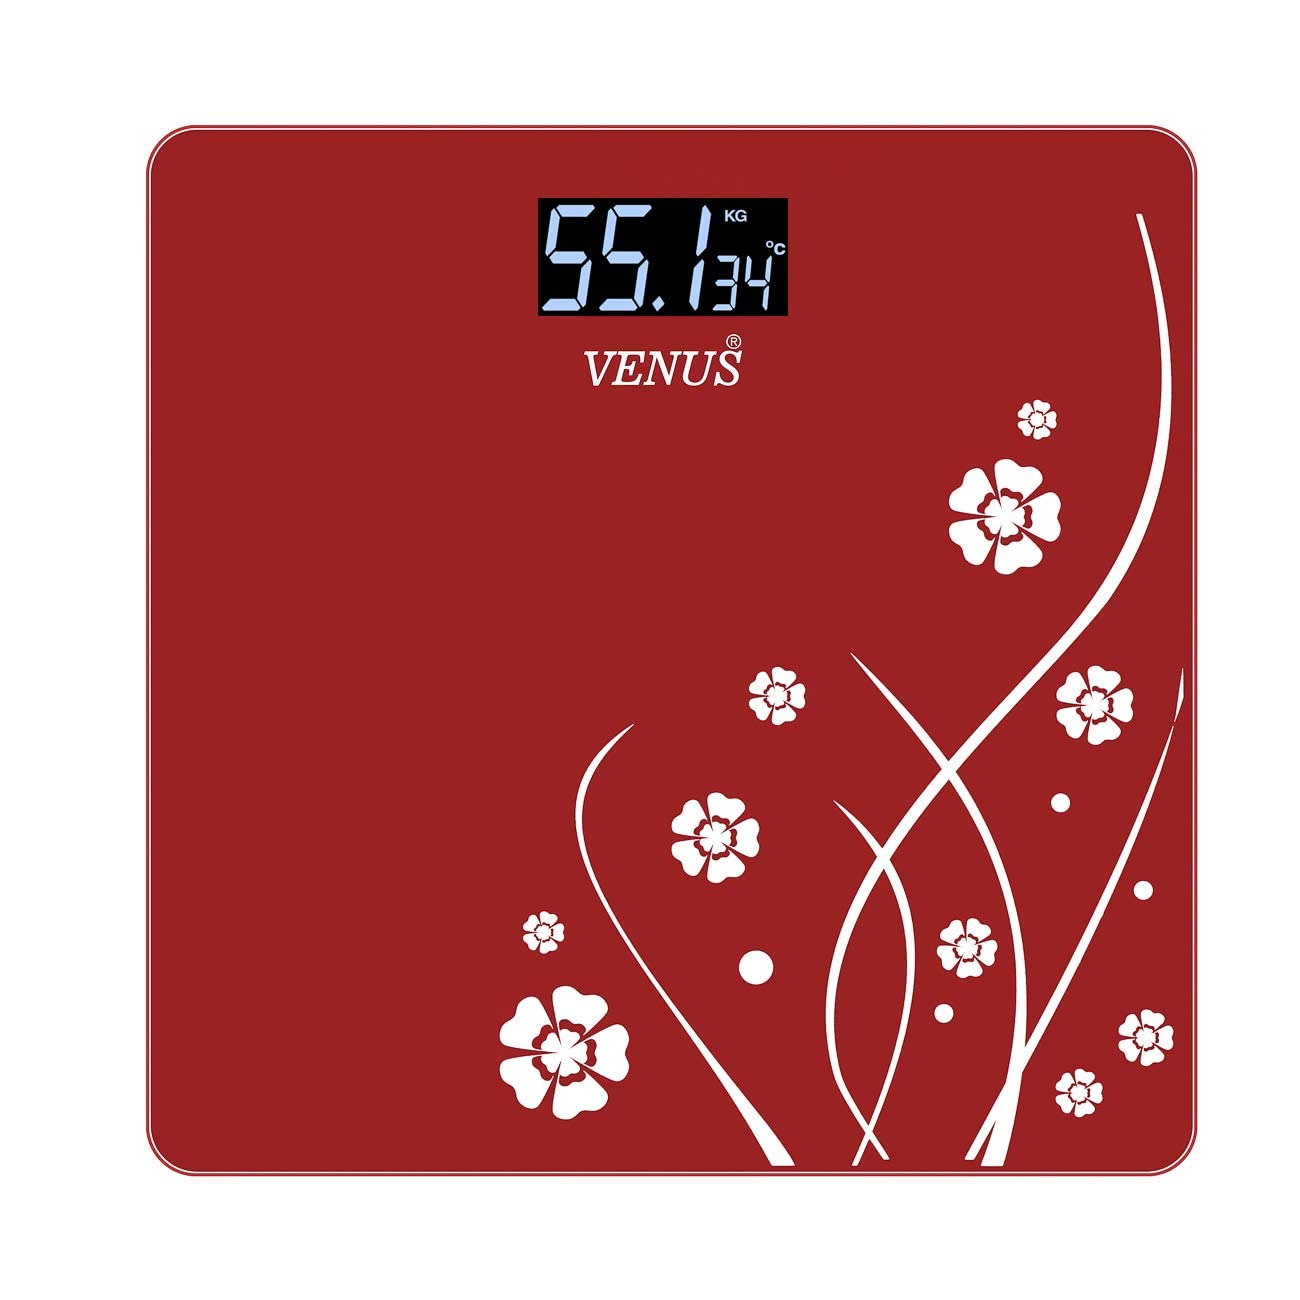 Venus (India) Electronic Digital Personal Bathroom Health Body Weight Weighing scale, Battery Included, 2 Year Warranty (Red)